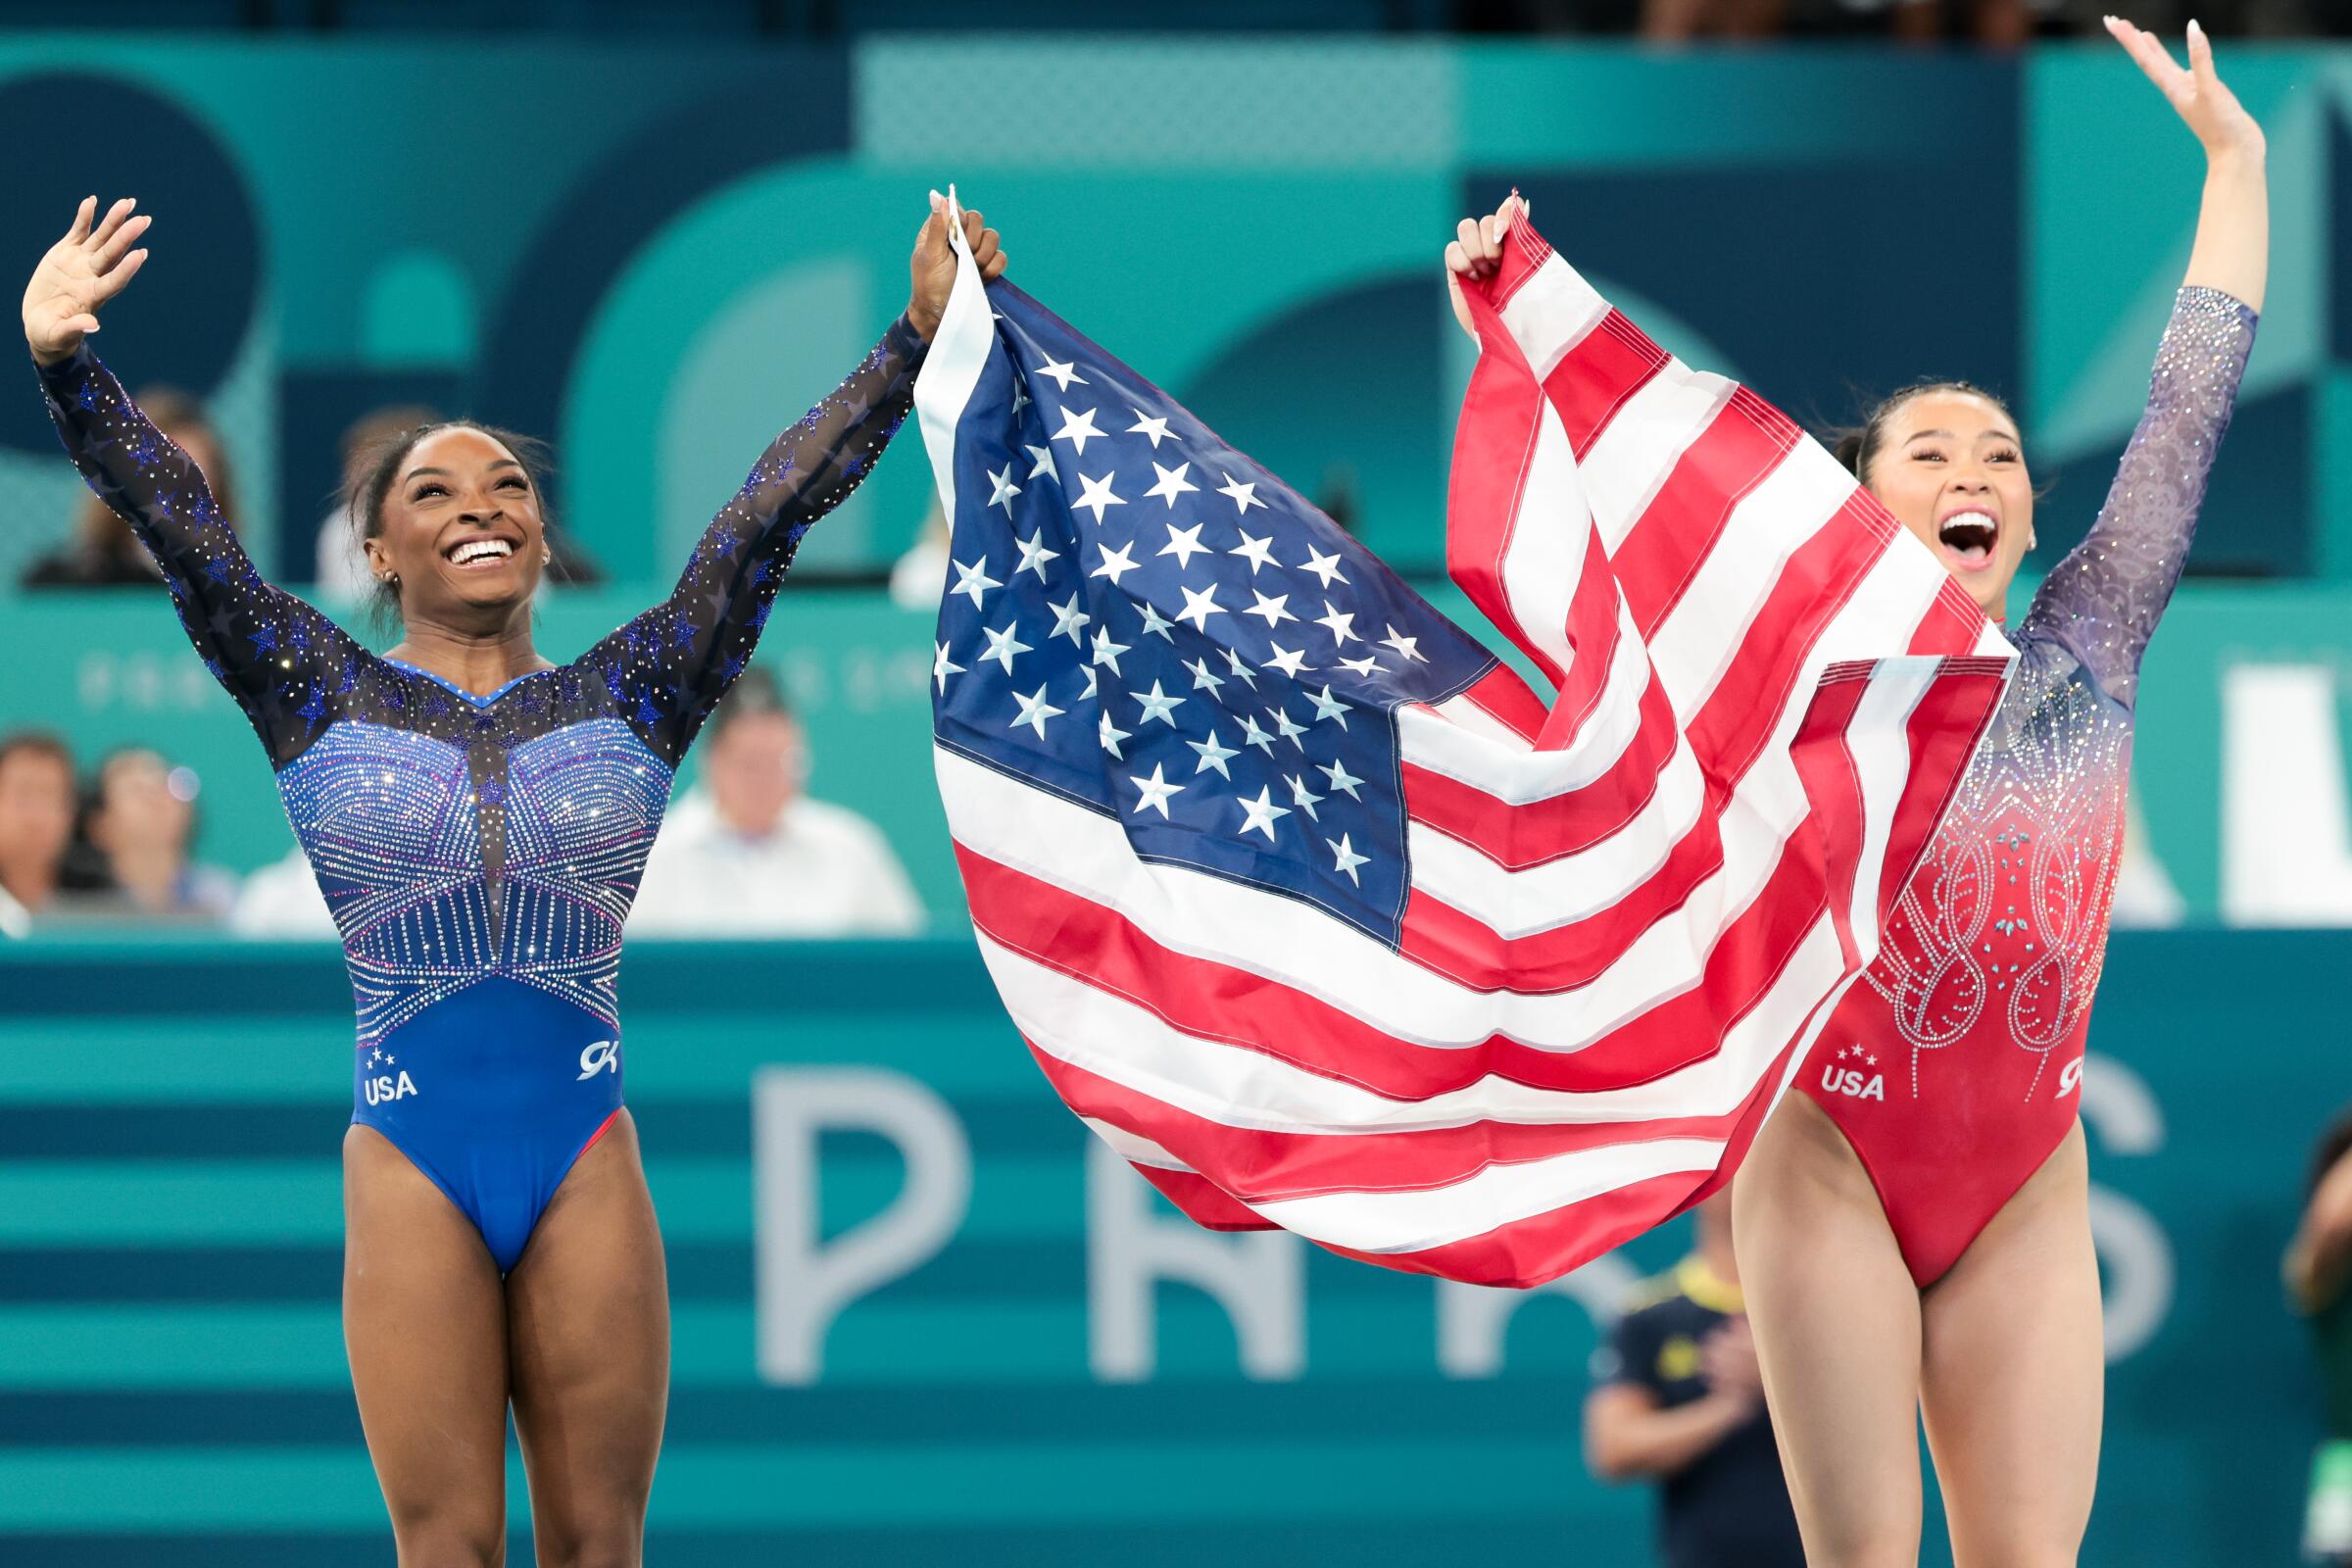 U.S. teammates Simone Biles and Suni Lee hold up an American flag and wave after Biles won gold and Lee won silver 